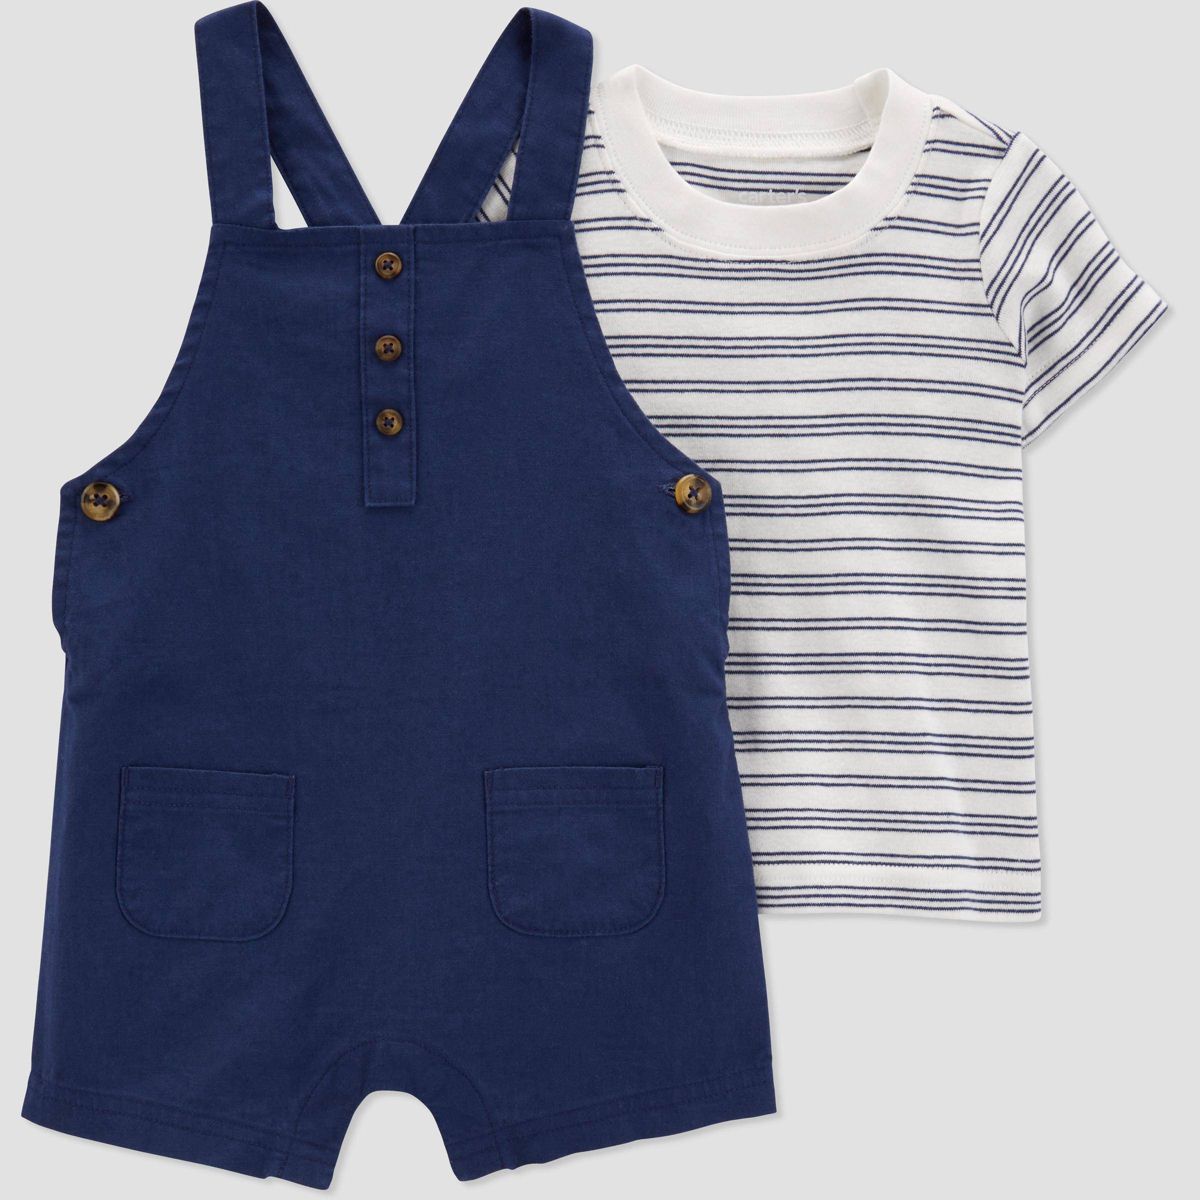 Carter's Just One You® Baby Boys' Striped Undershirt & Bottom Set - Navy Blue/White 24M | Target